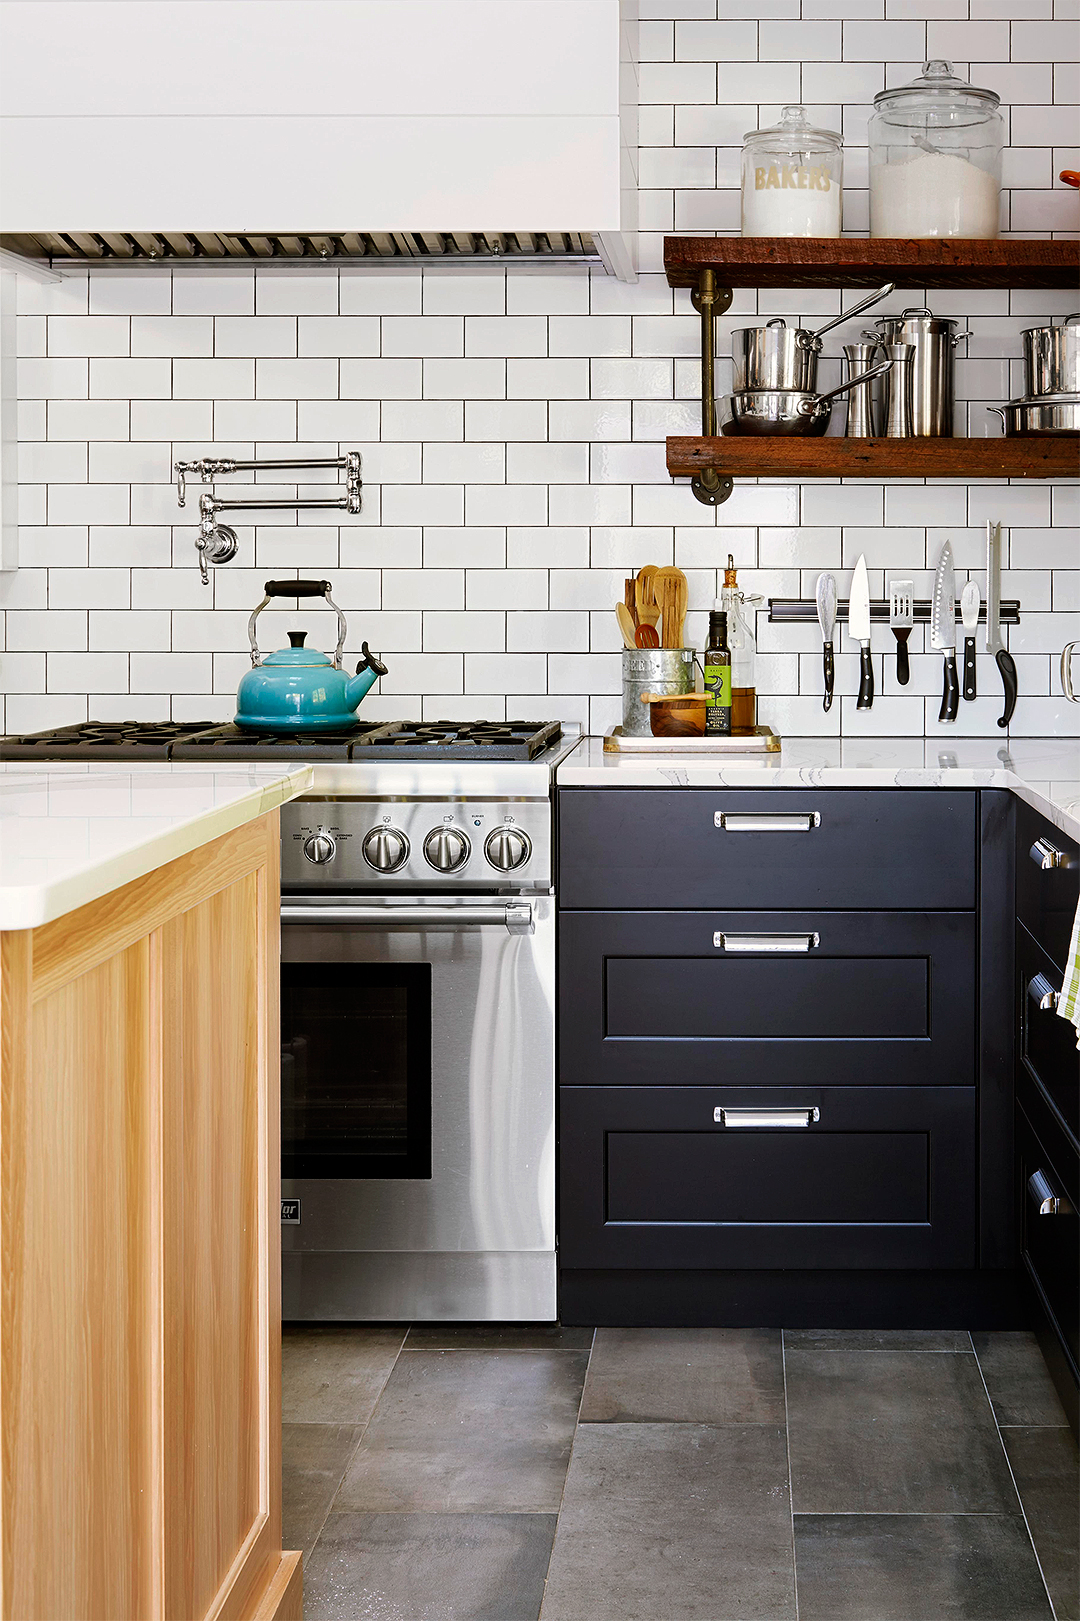 White Brick Tile Backsplash Kitchen Lovely Kitchen Trends that are Here to Stay